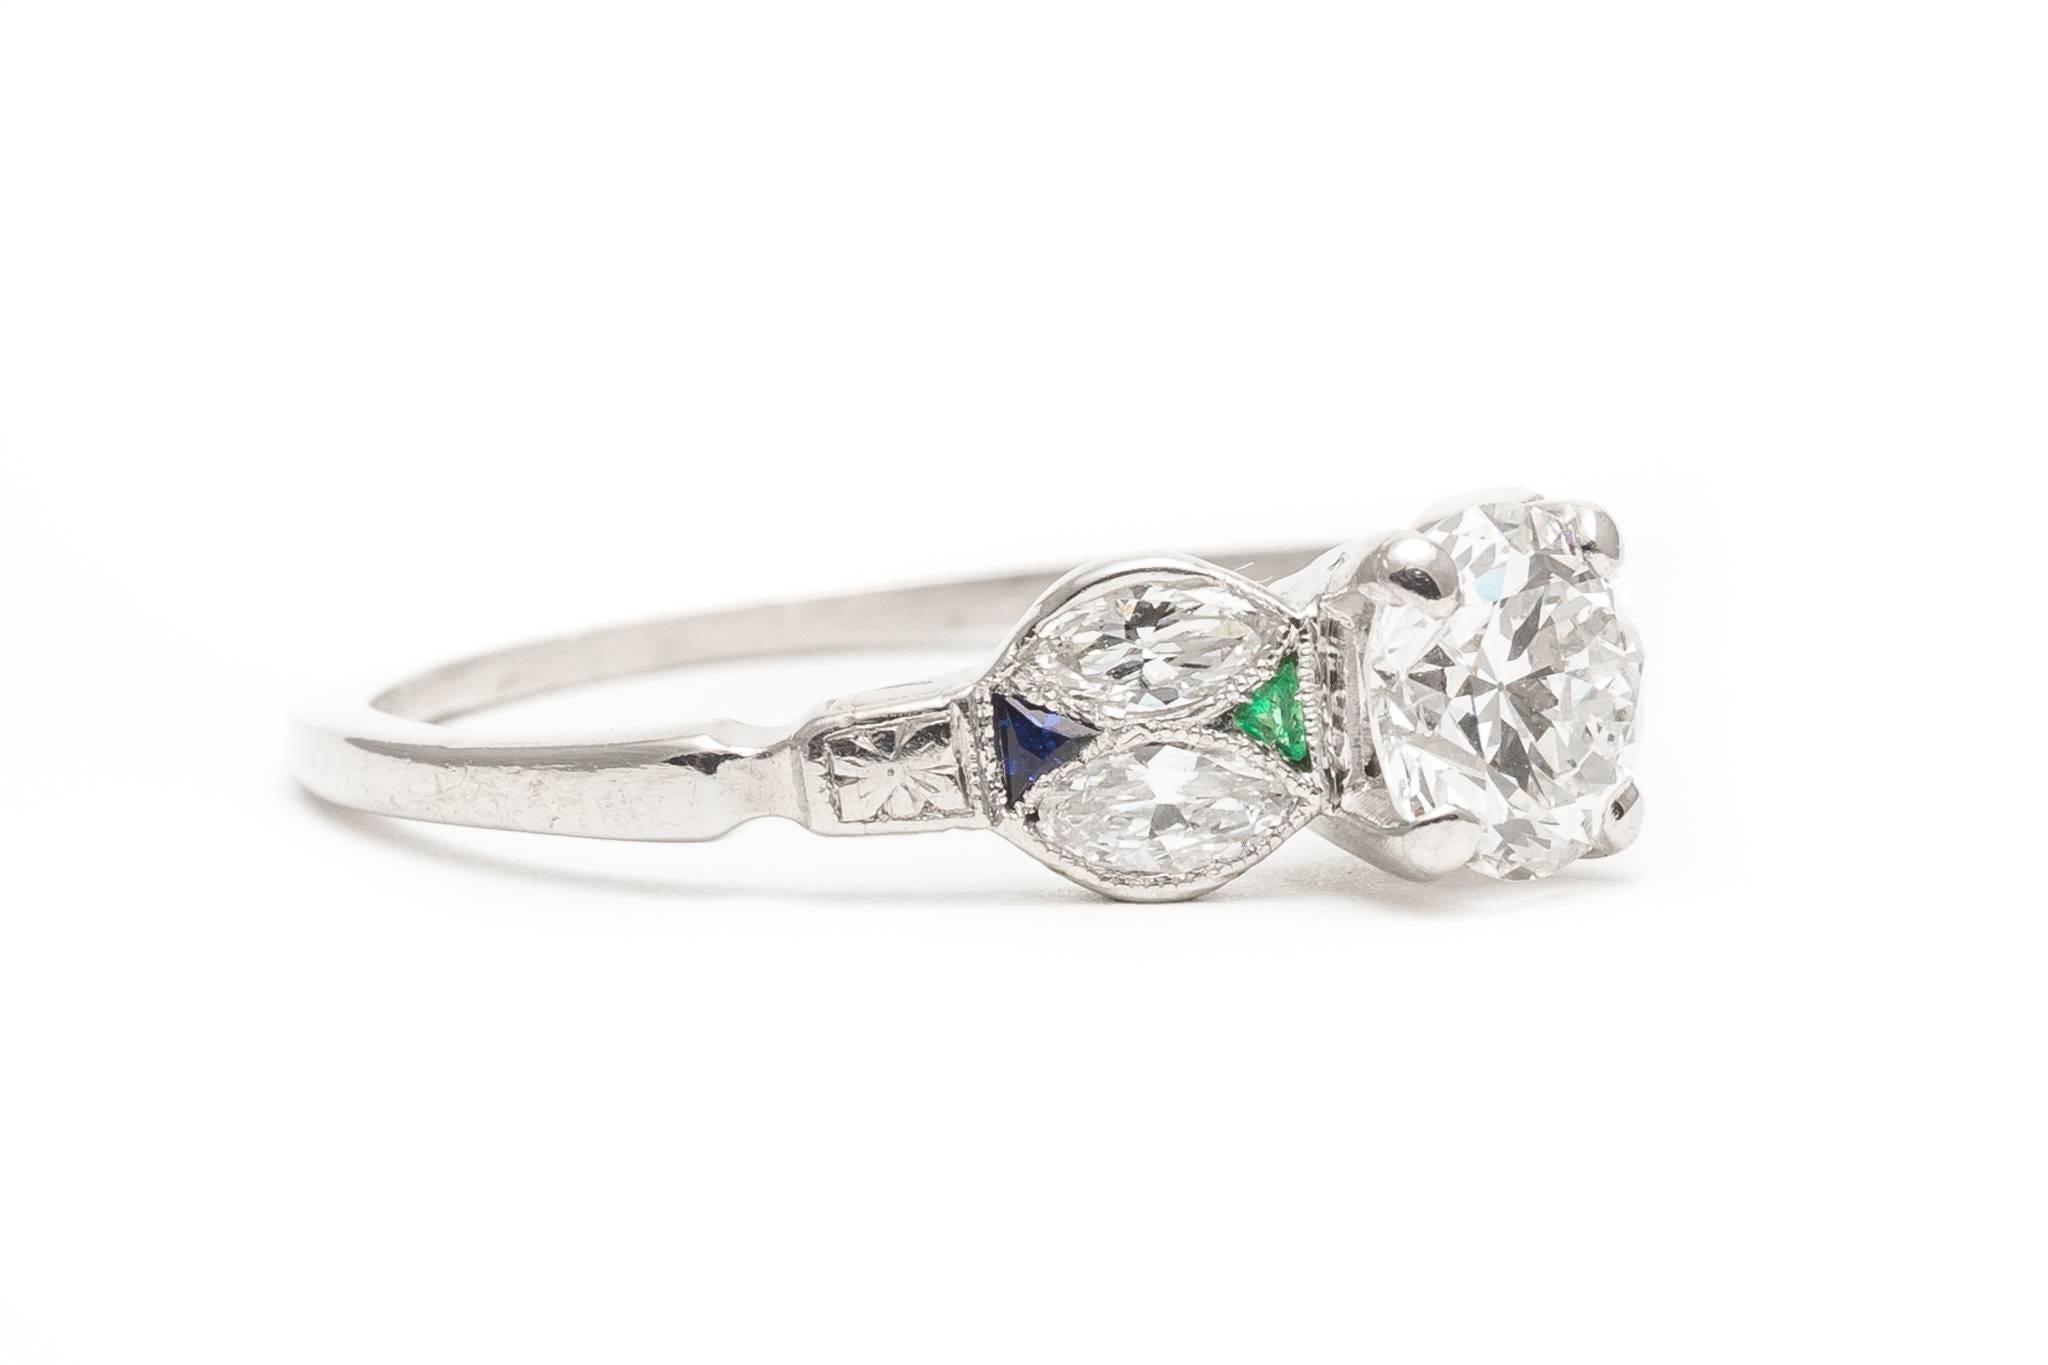 Women's Art Deco 0.80 Carat Diamond, Emerald and Sapphire Engagement Ring For Sale